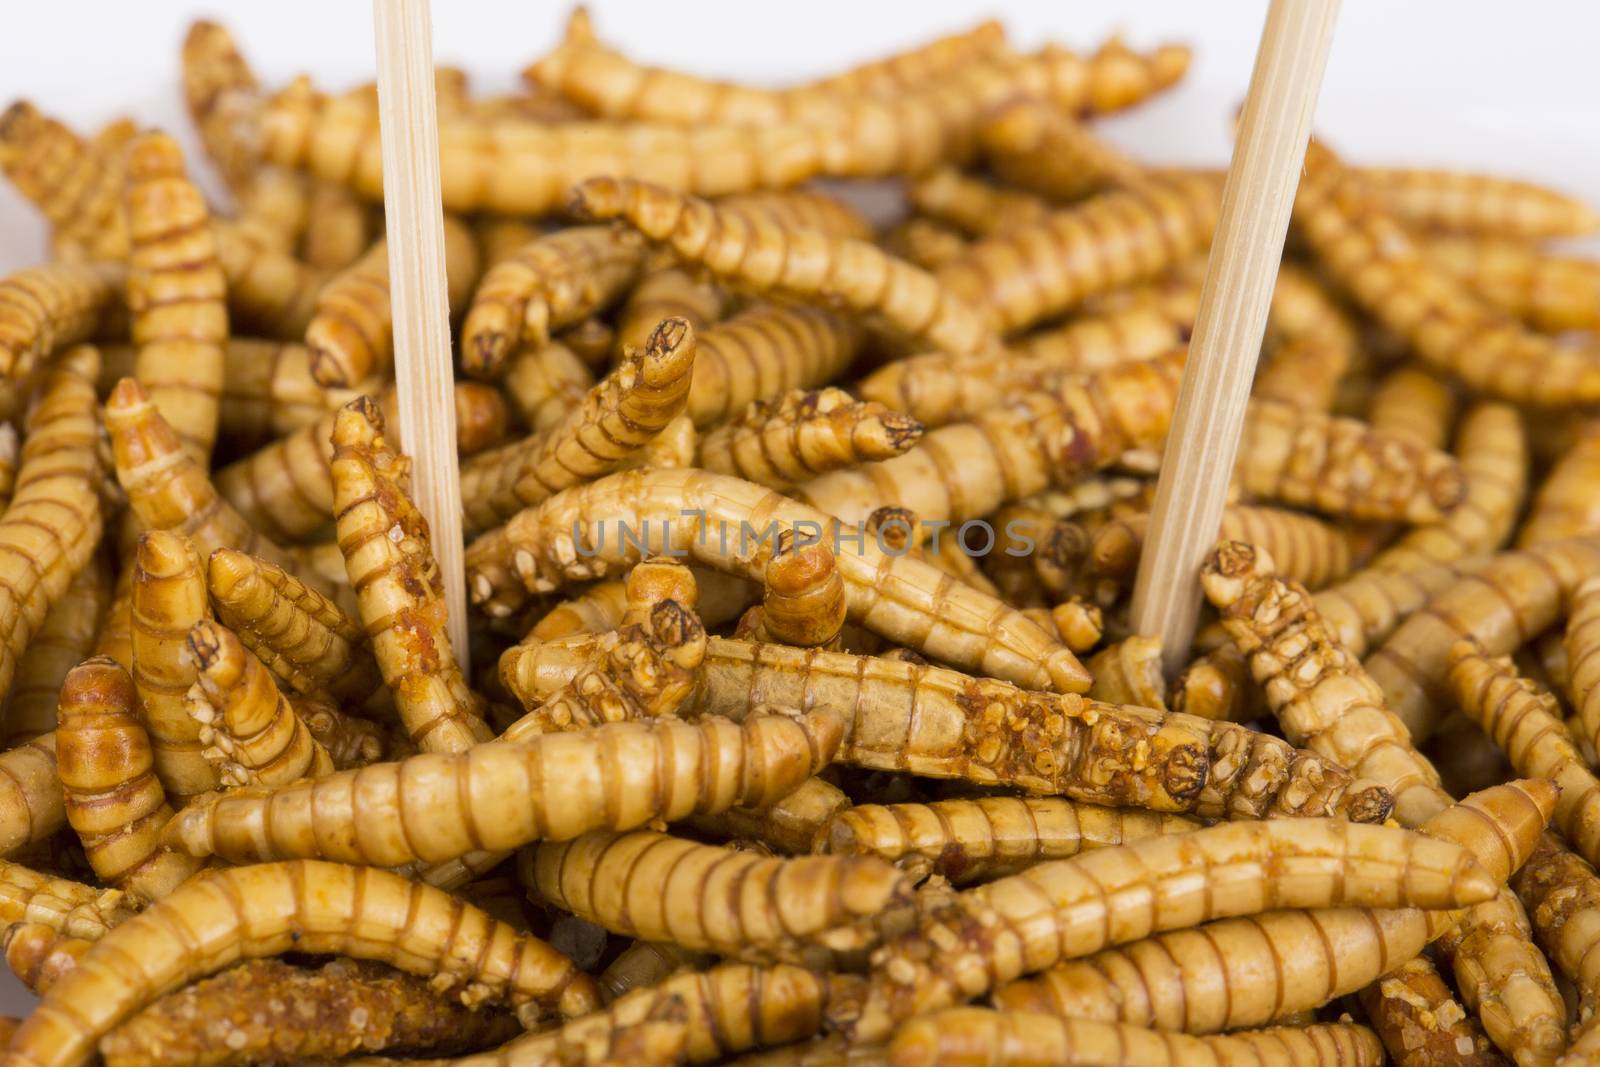 Fried insects Molitors, Protein rich food by CatherineL-Prod